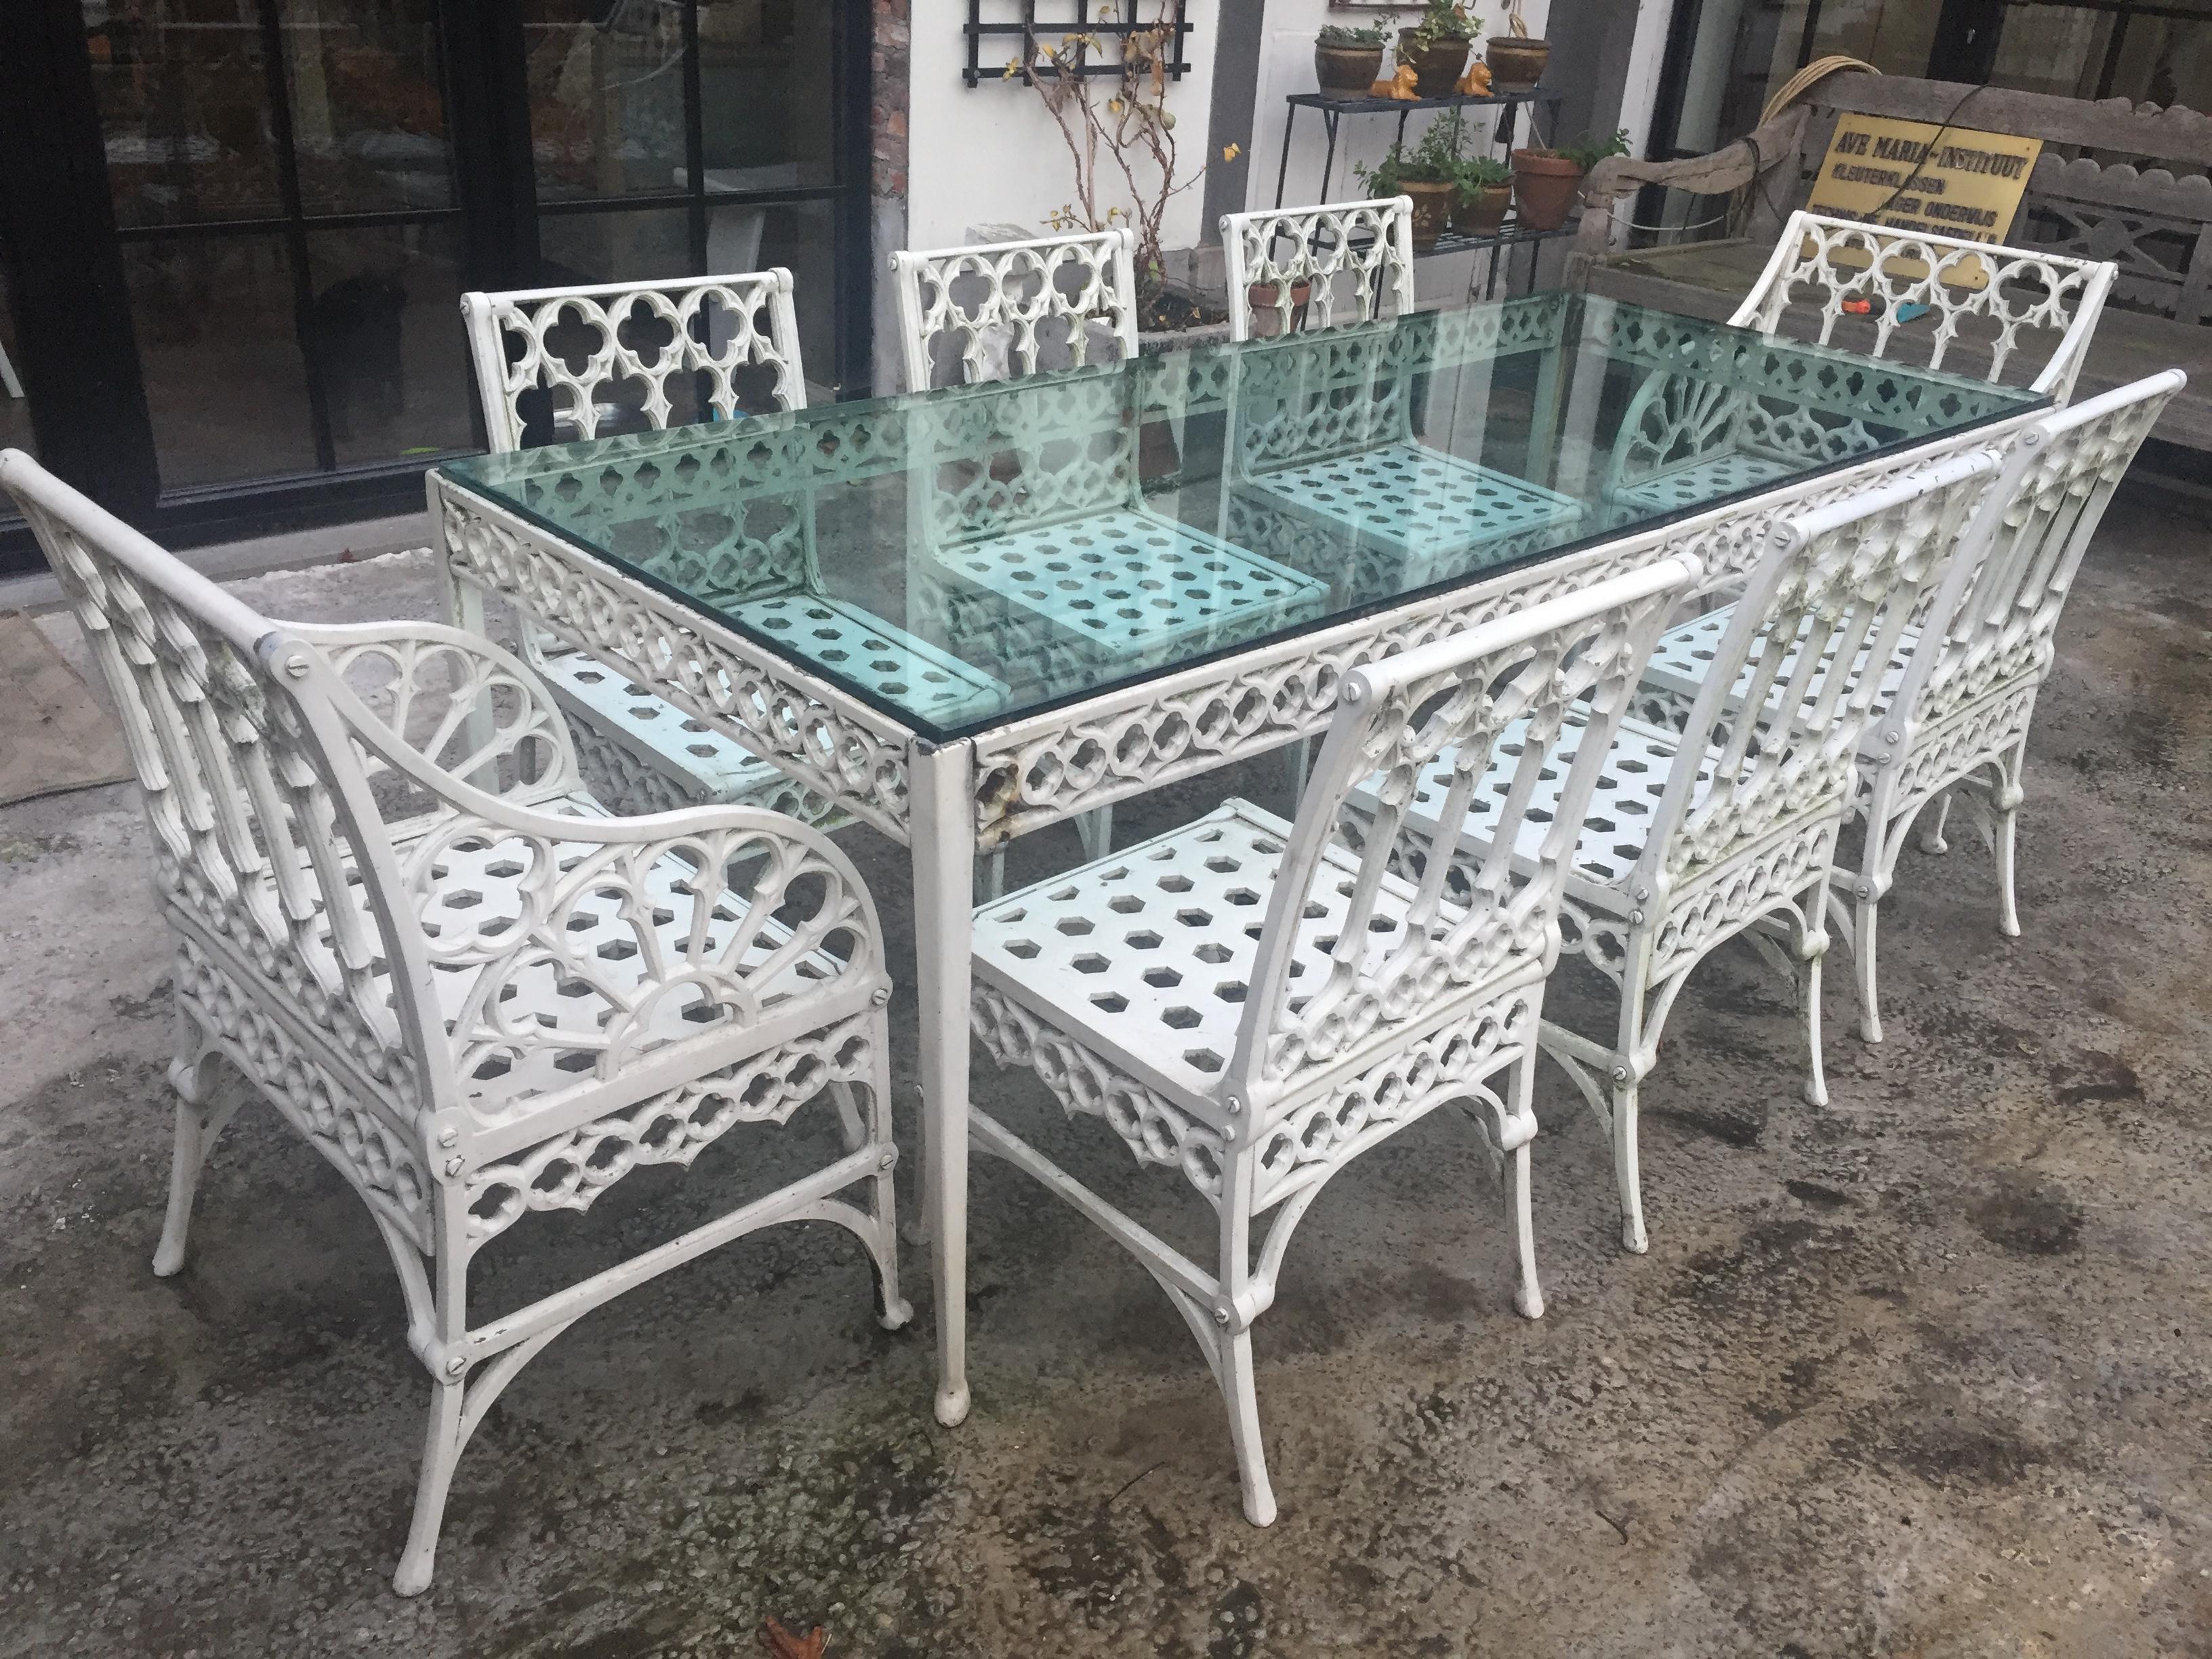 European Gothic Revival Garden Dining Set of 8 Chairs and Table